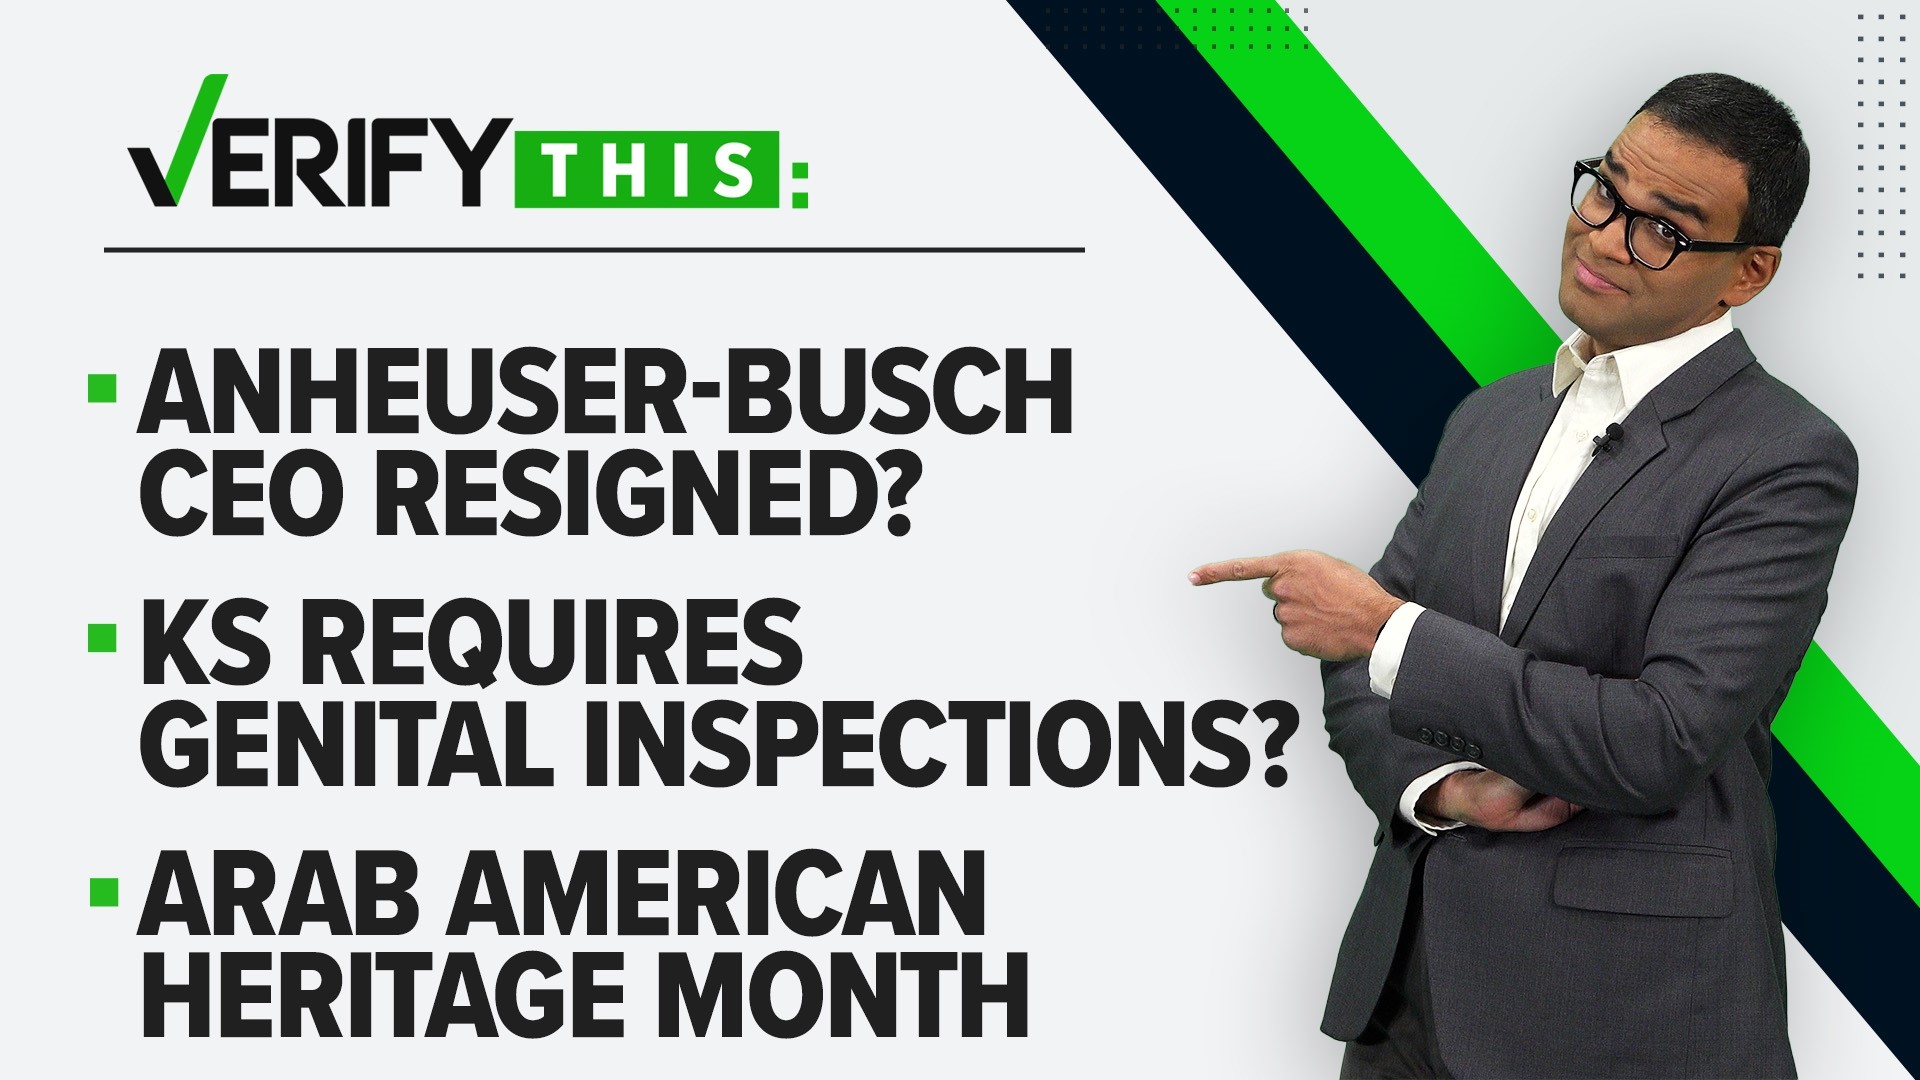 Fact-checking claims about the CEO of Anheuser-Busch resigning, genital inspections to play sports, juice jacking devices and more.